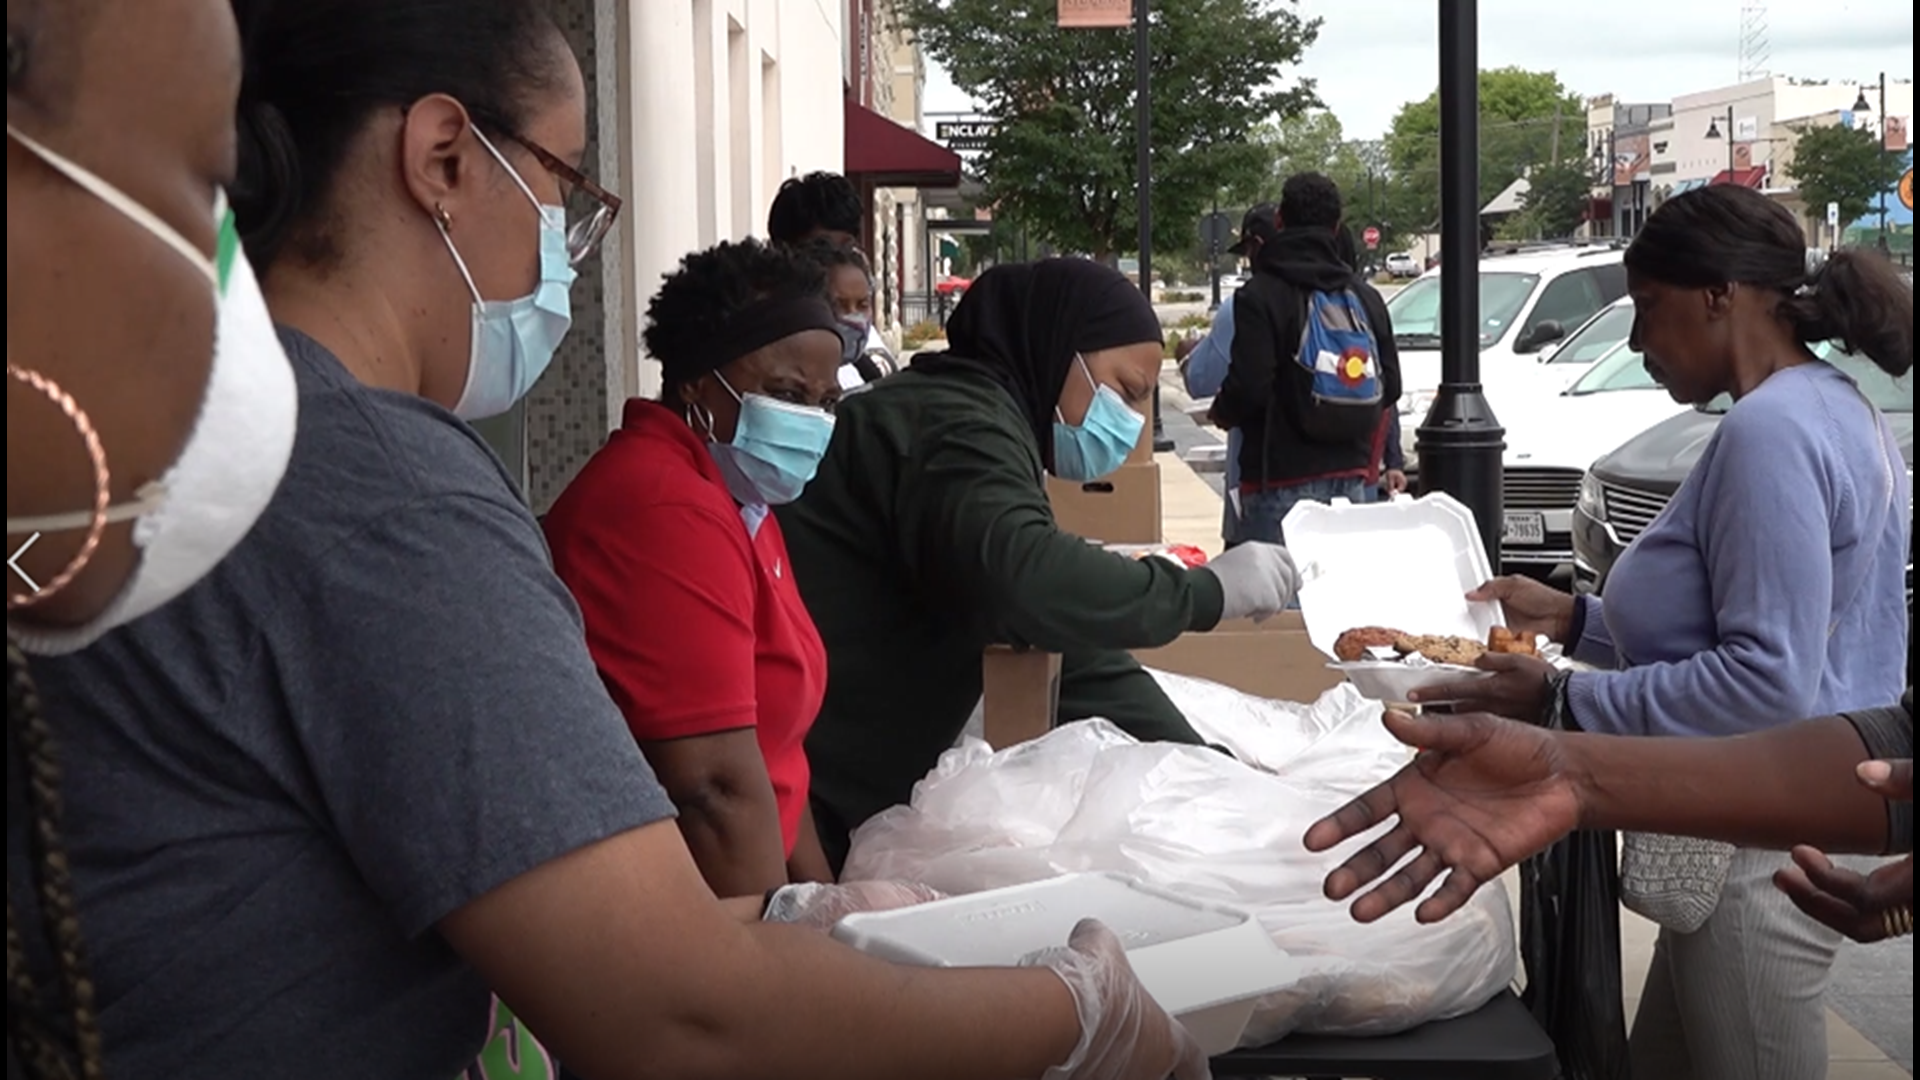 The group of businesses leaders handed out food in Downtown Killeen, hoping to alleviate the stress of those impacted most by the pandemic.